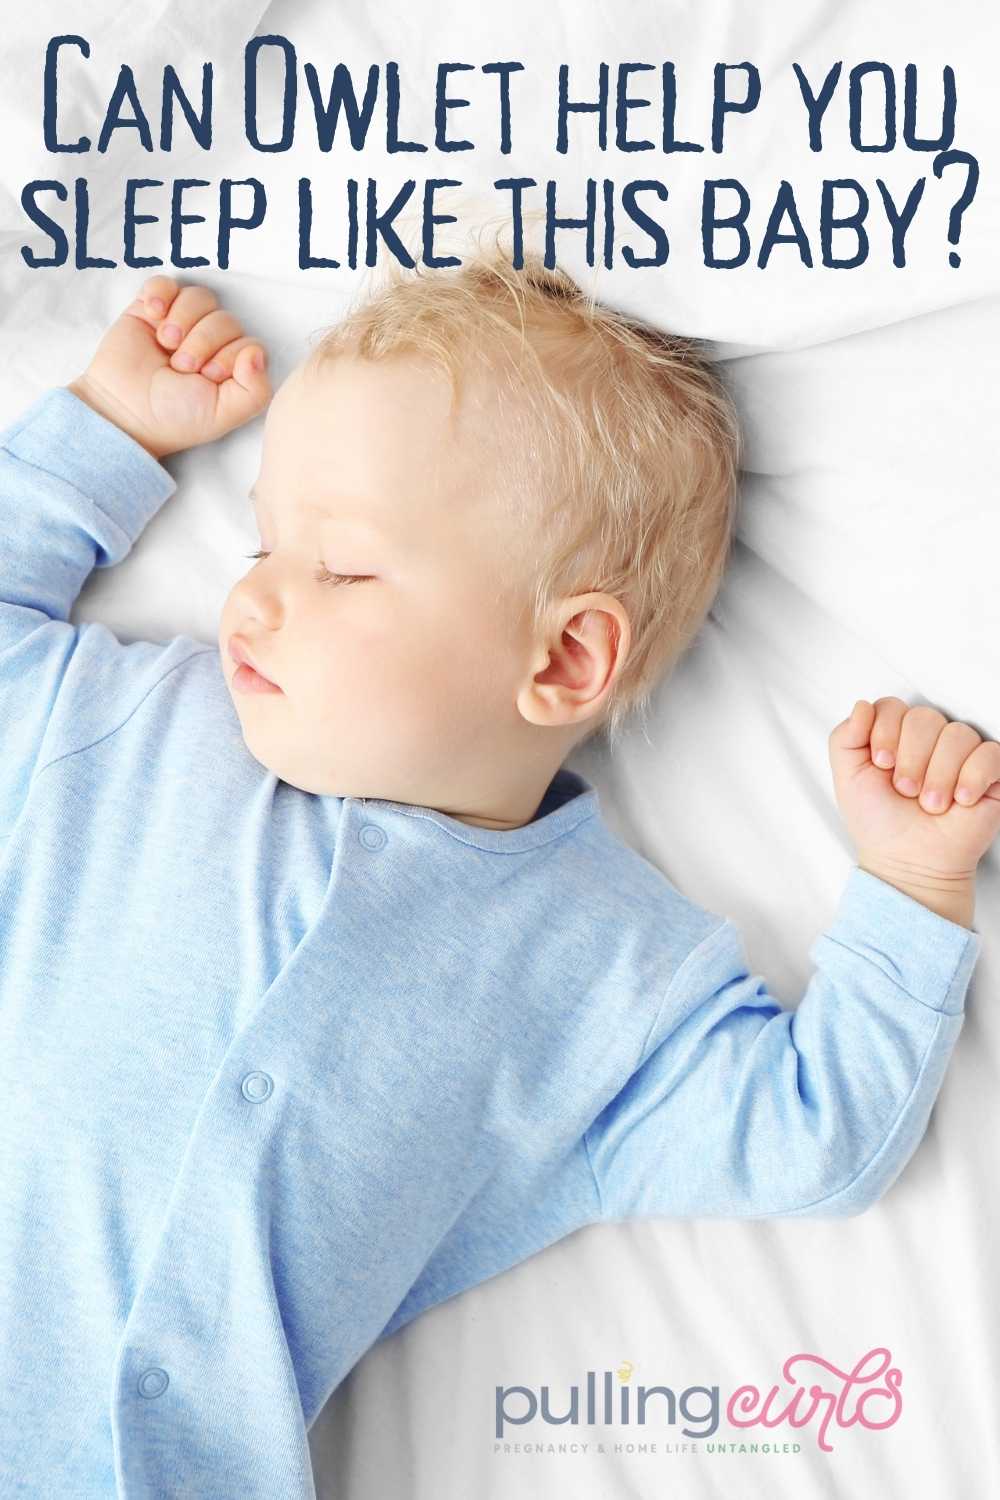 Infant in blue pajamas sleeping on their back, Can Owlet help you sleep like this baby? via @pullingcurls